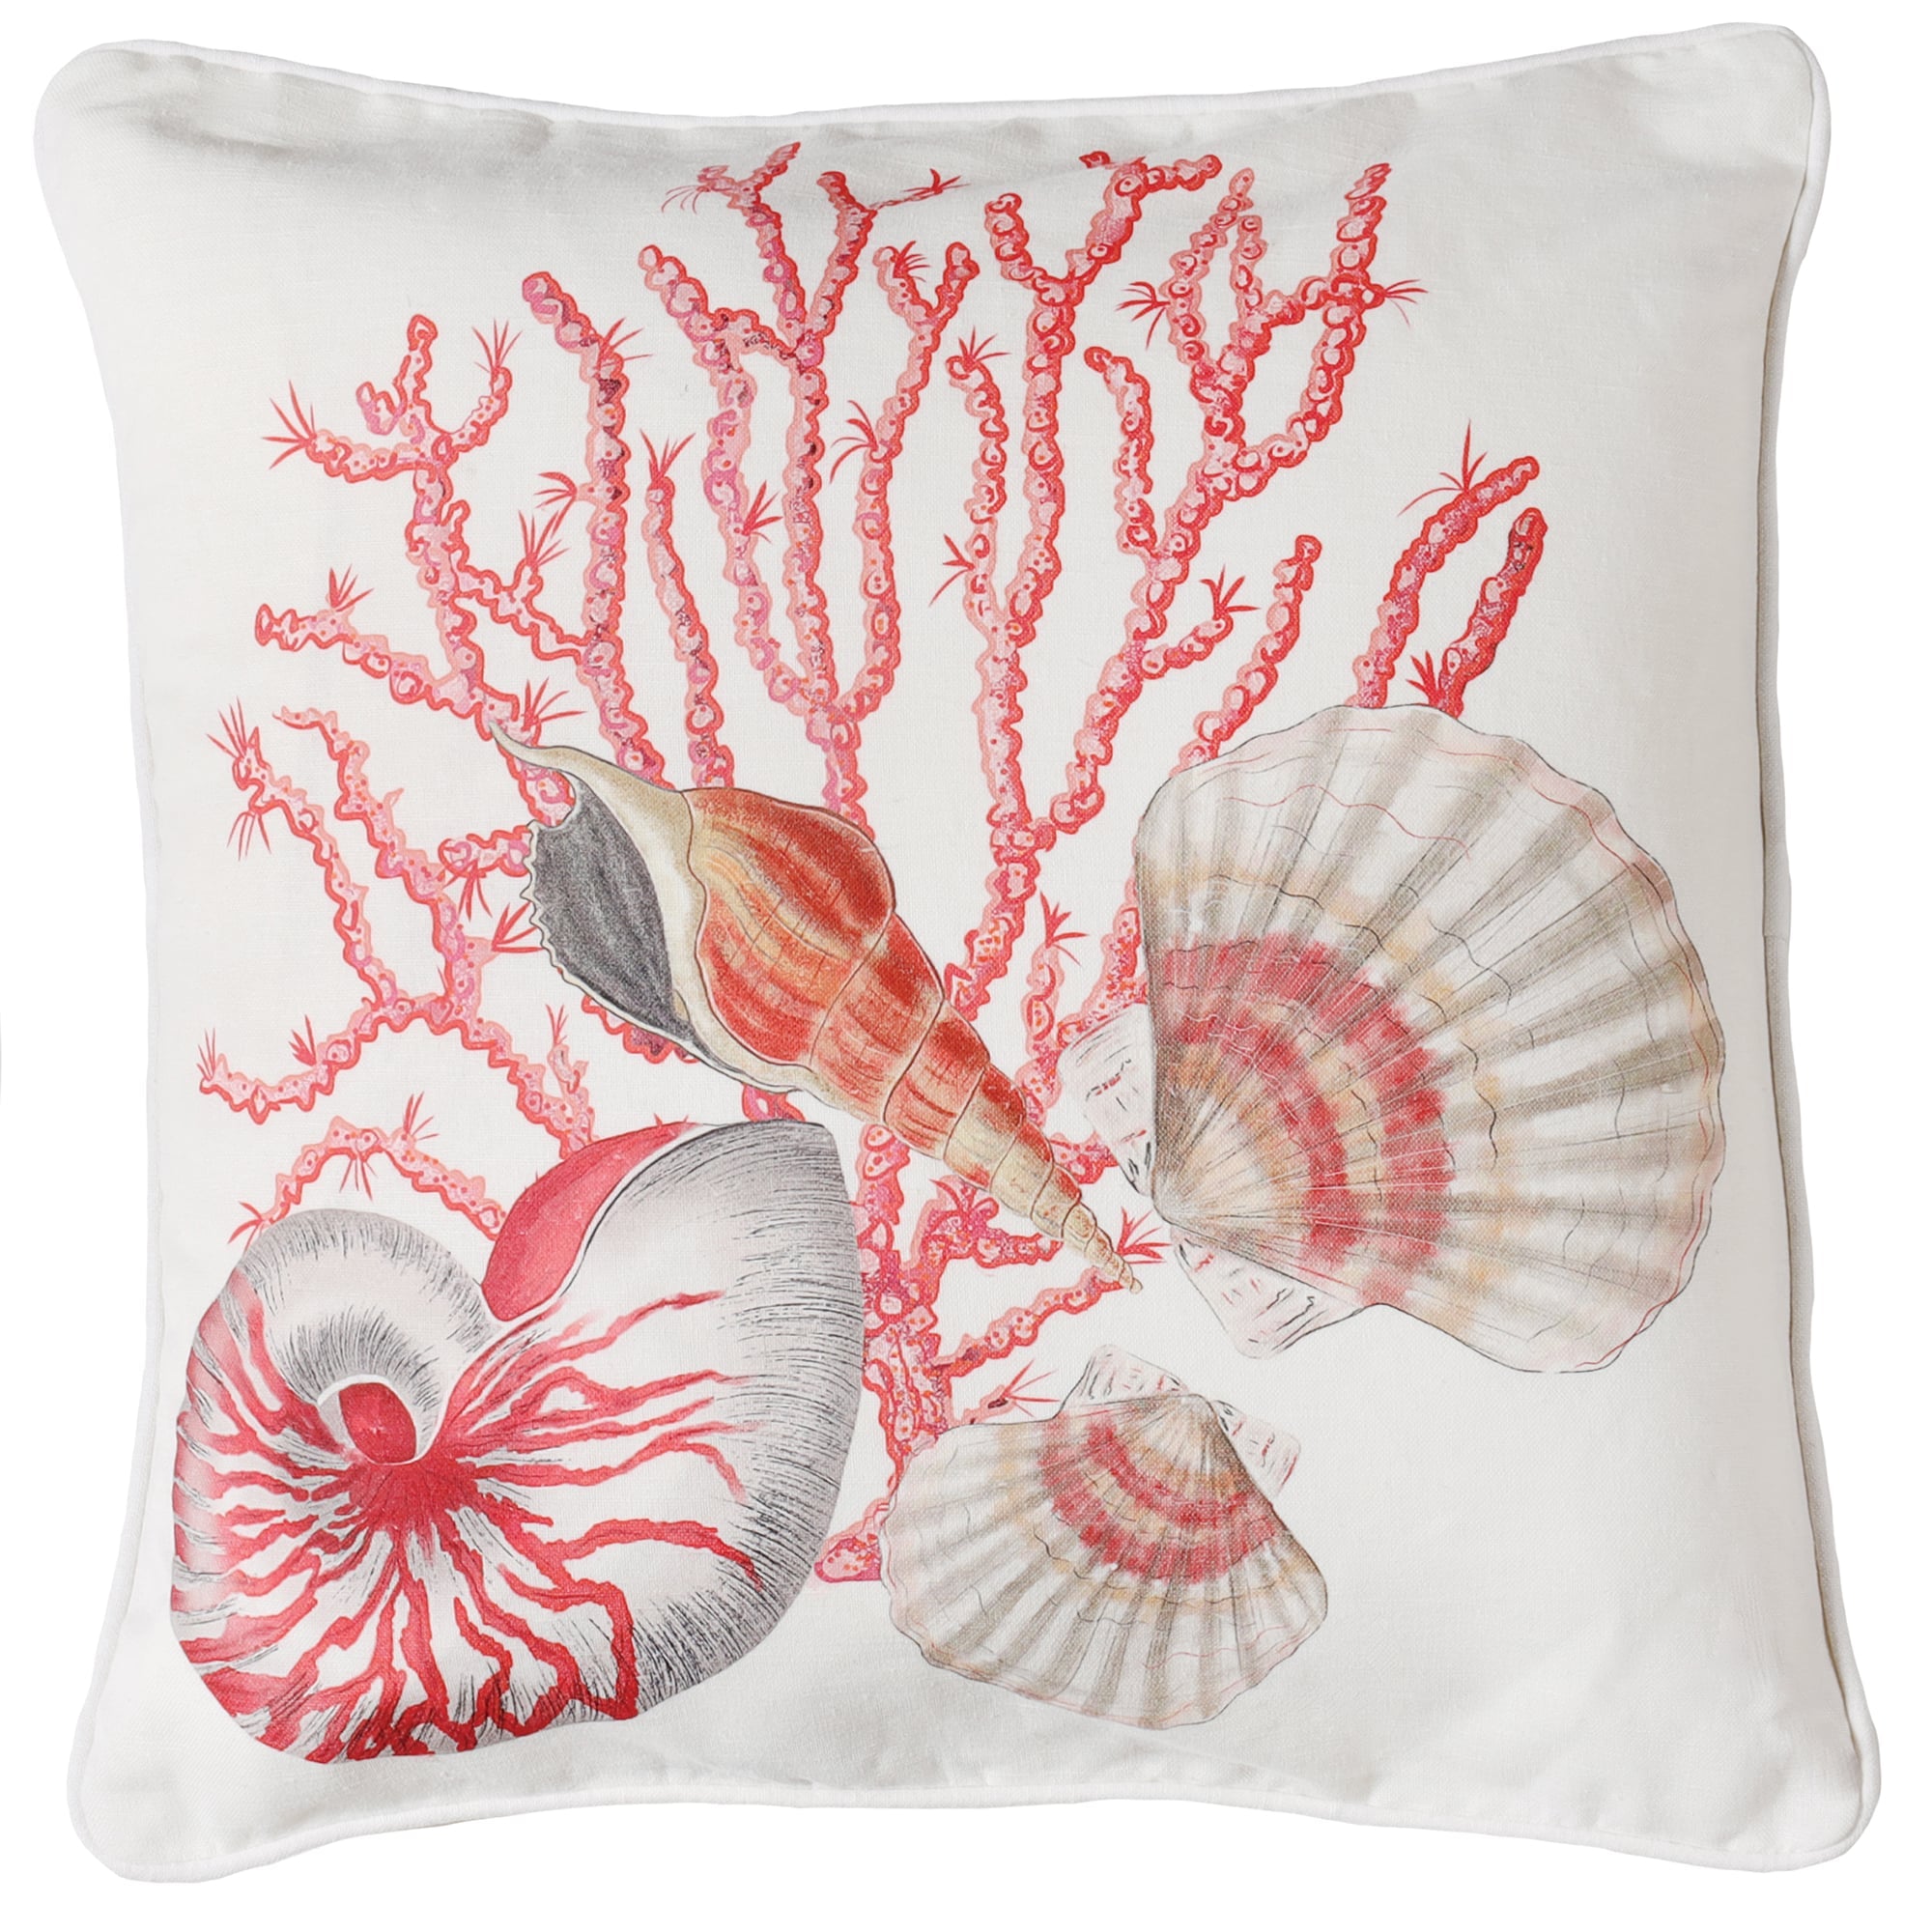 off white piped linen cushion cover with sea shell and coral hand drawn illustrations in pinks